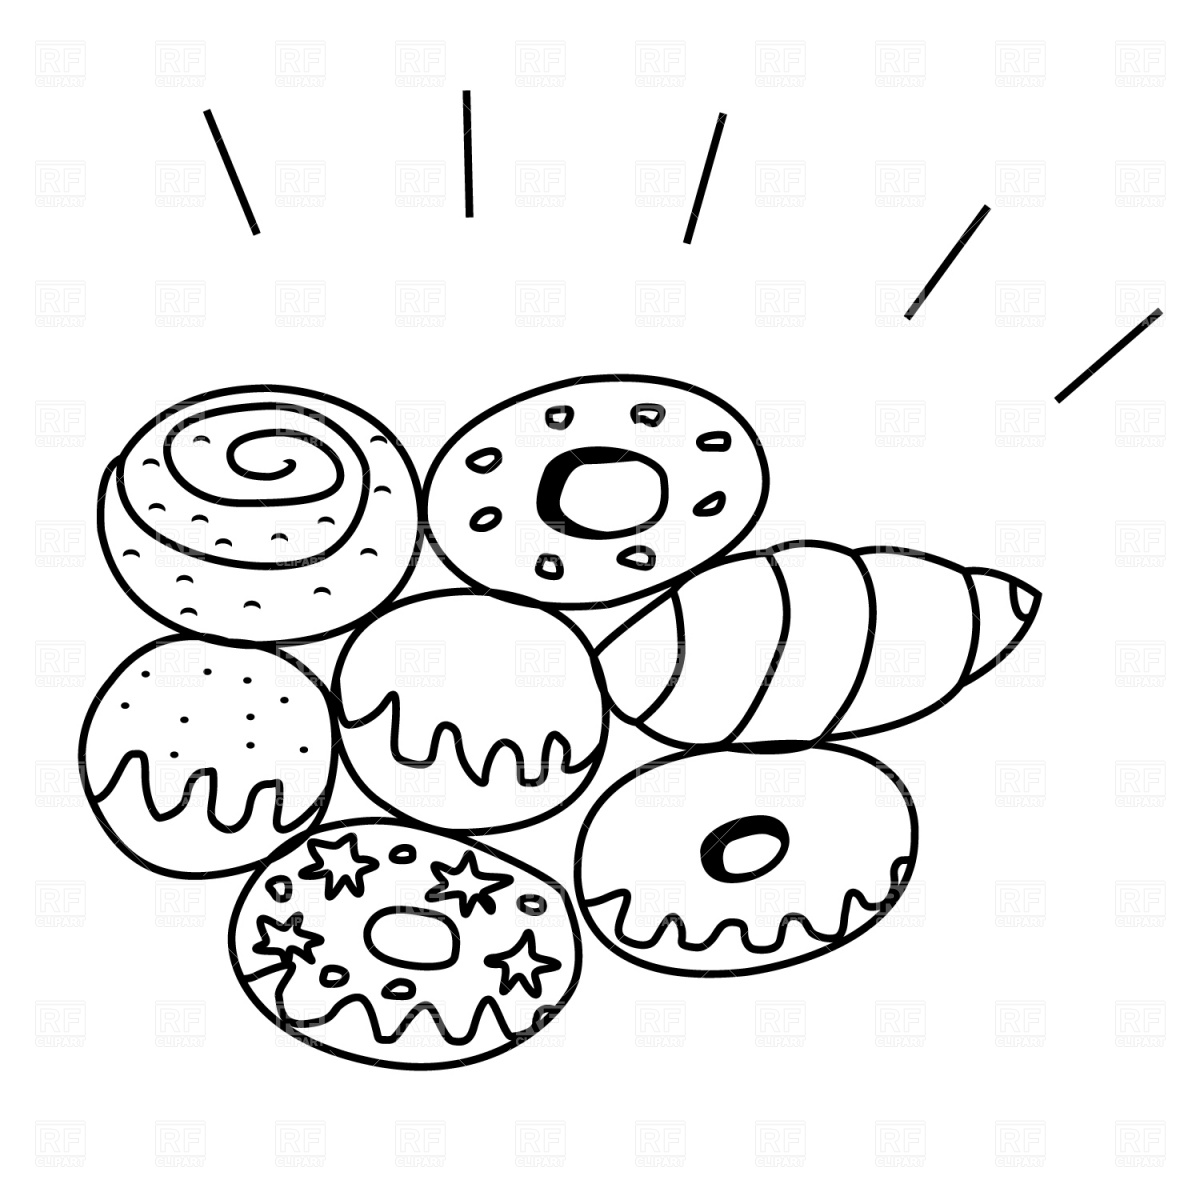 Doughnuts And Buns Download Royalty Free Vector Clipart Eps Icon ...